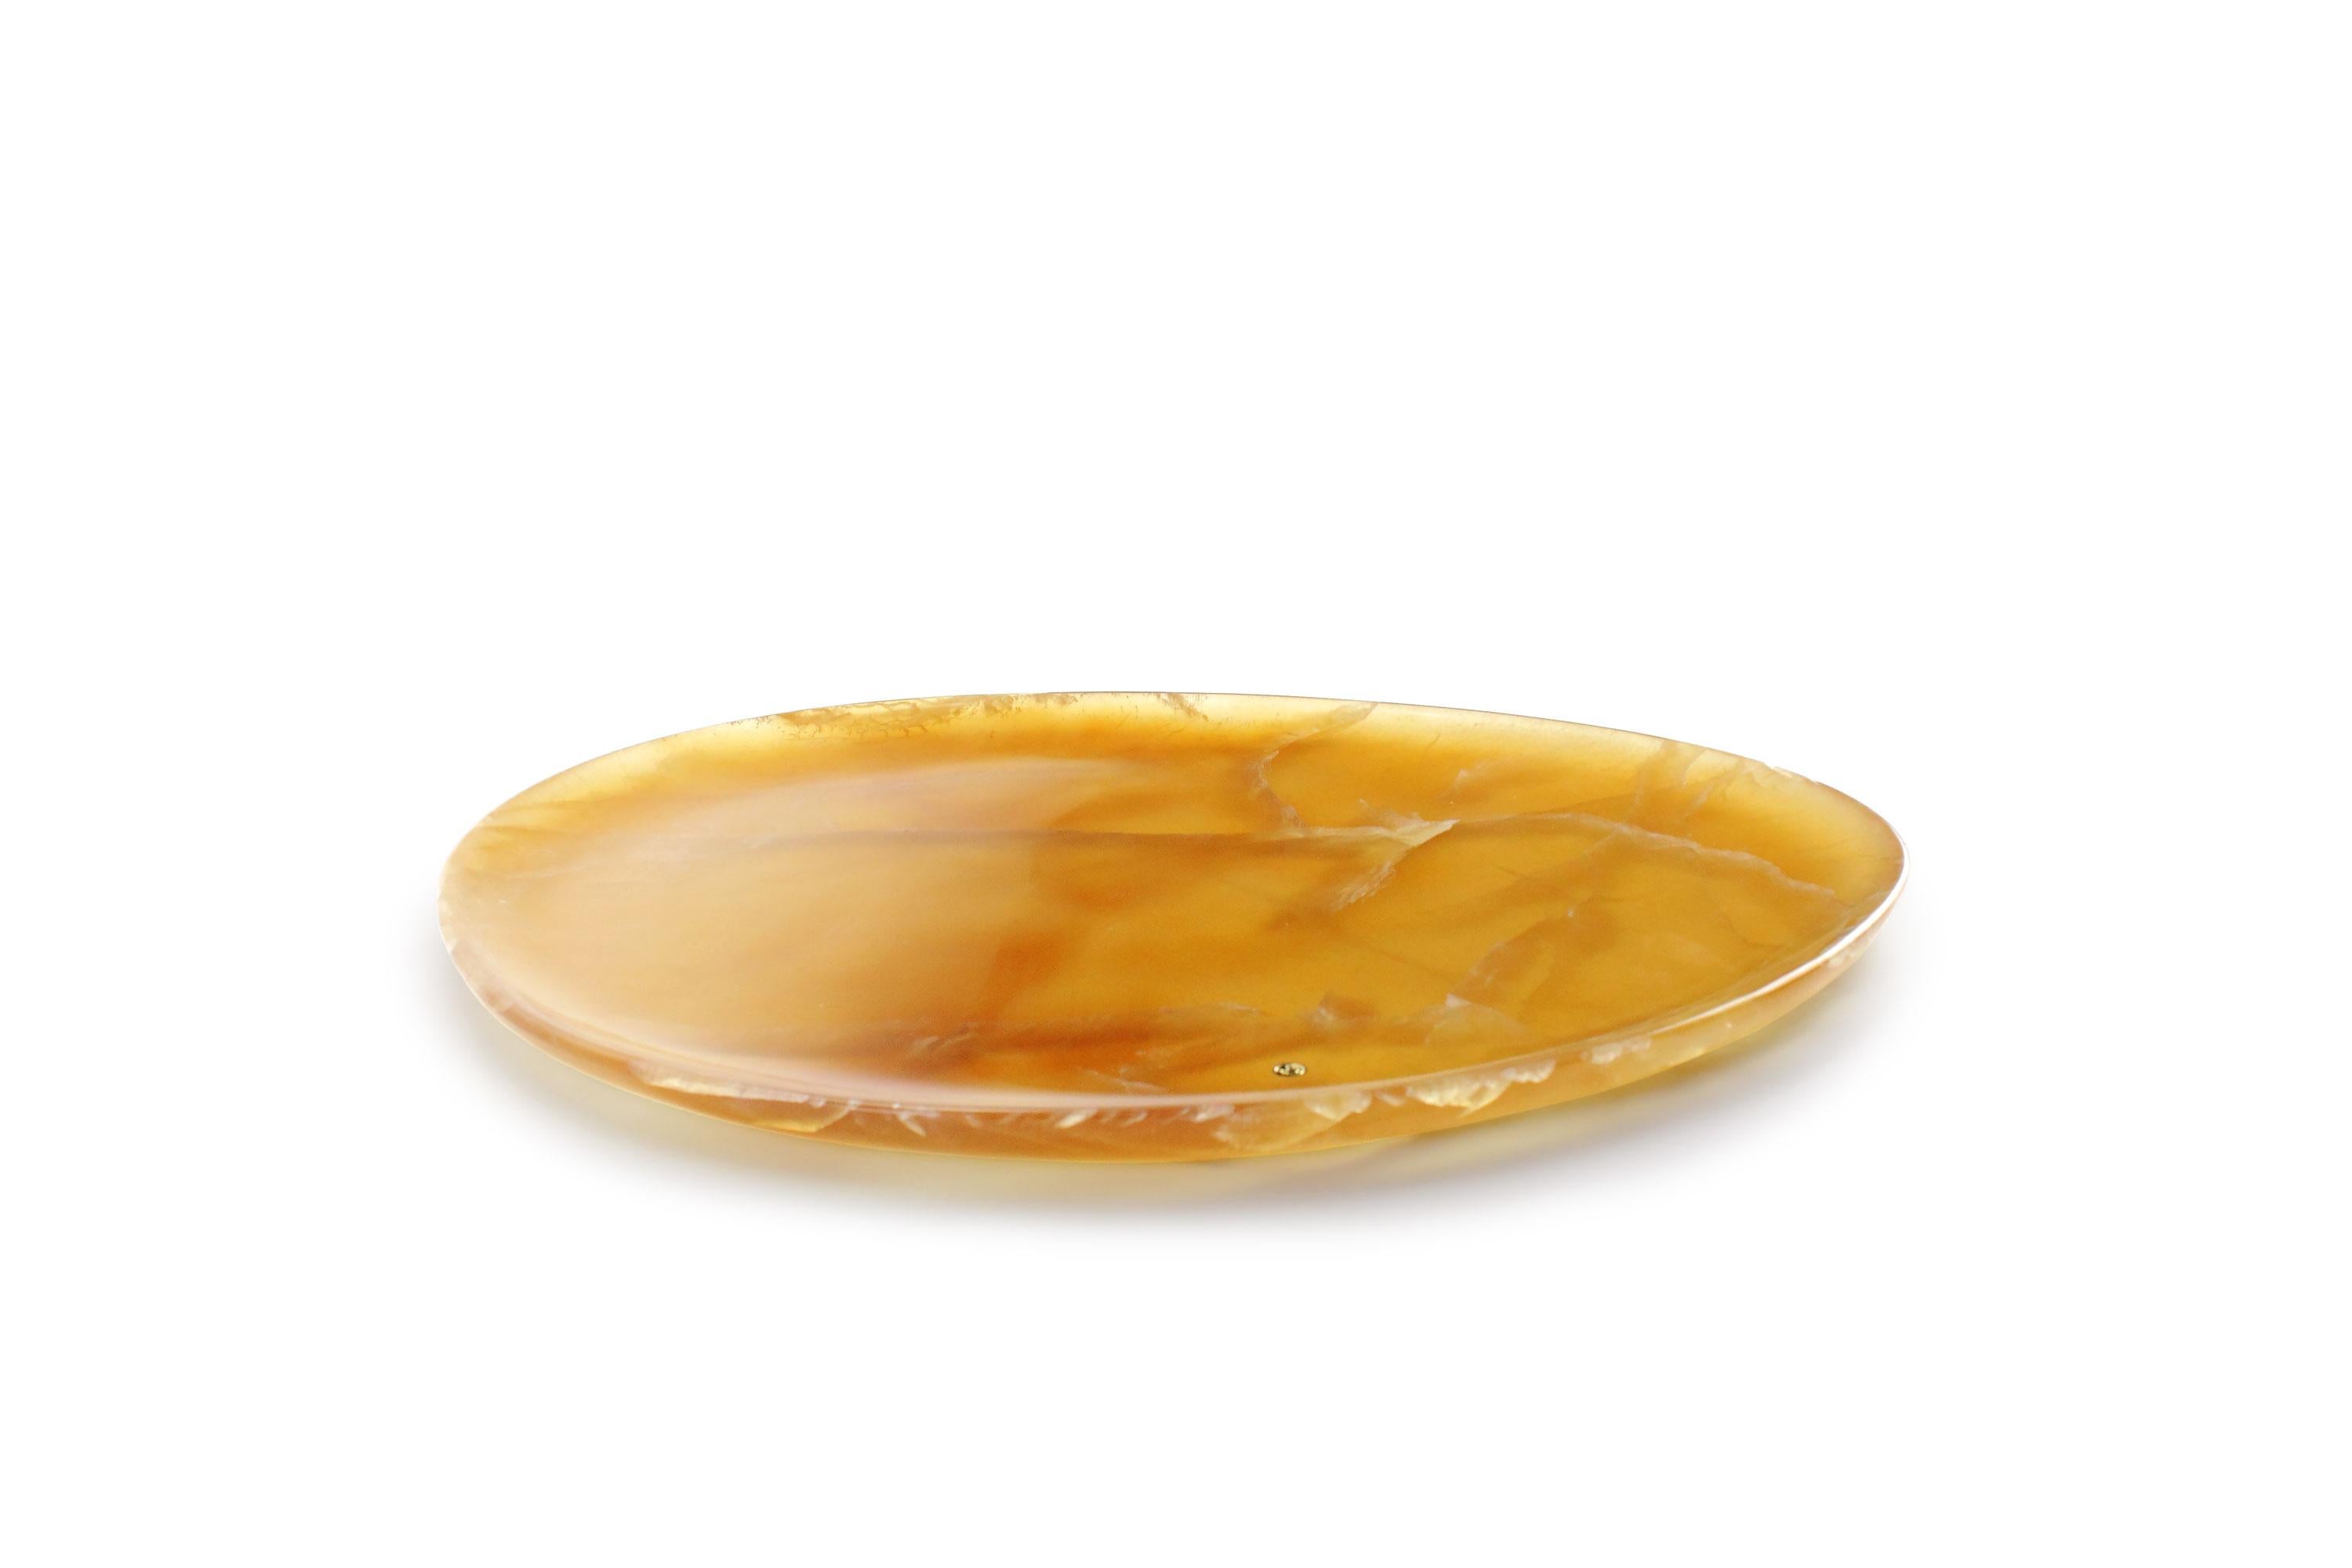 Hand carved presentation plate from Amber onyx. Multiple use as plates, platters and placers. The polished finishing underlines the transparency of the onyx making this a very precious object. 

Dimensions: Big L 36, W 35, H 1.8 cm, also available: